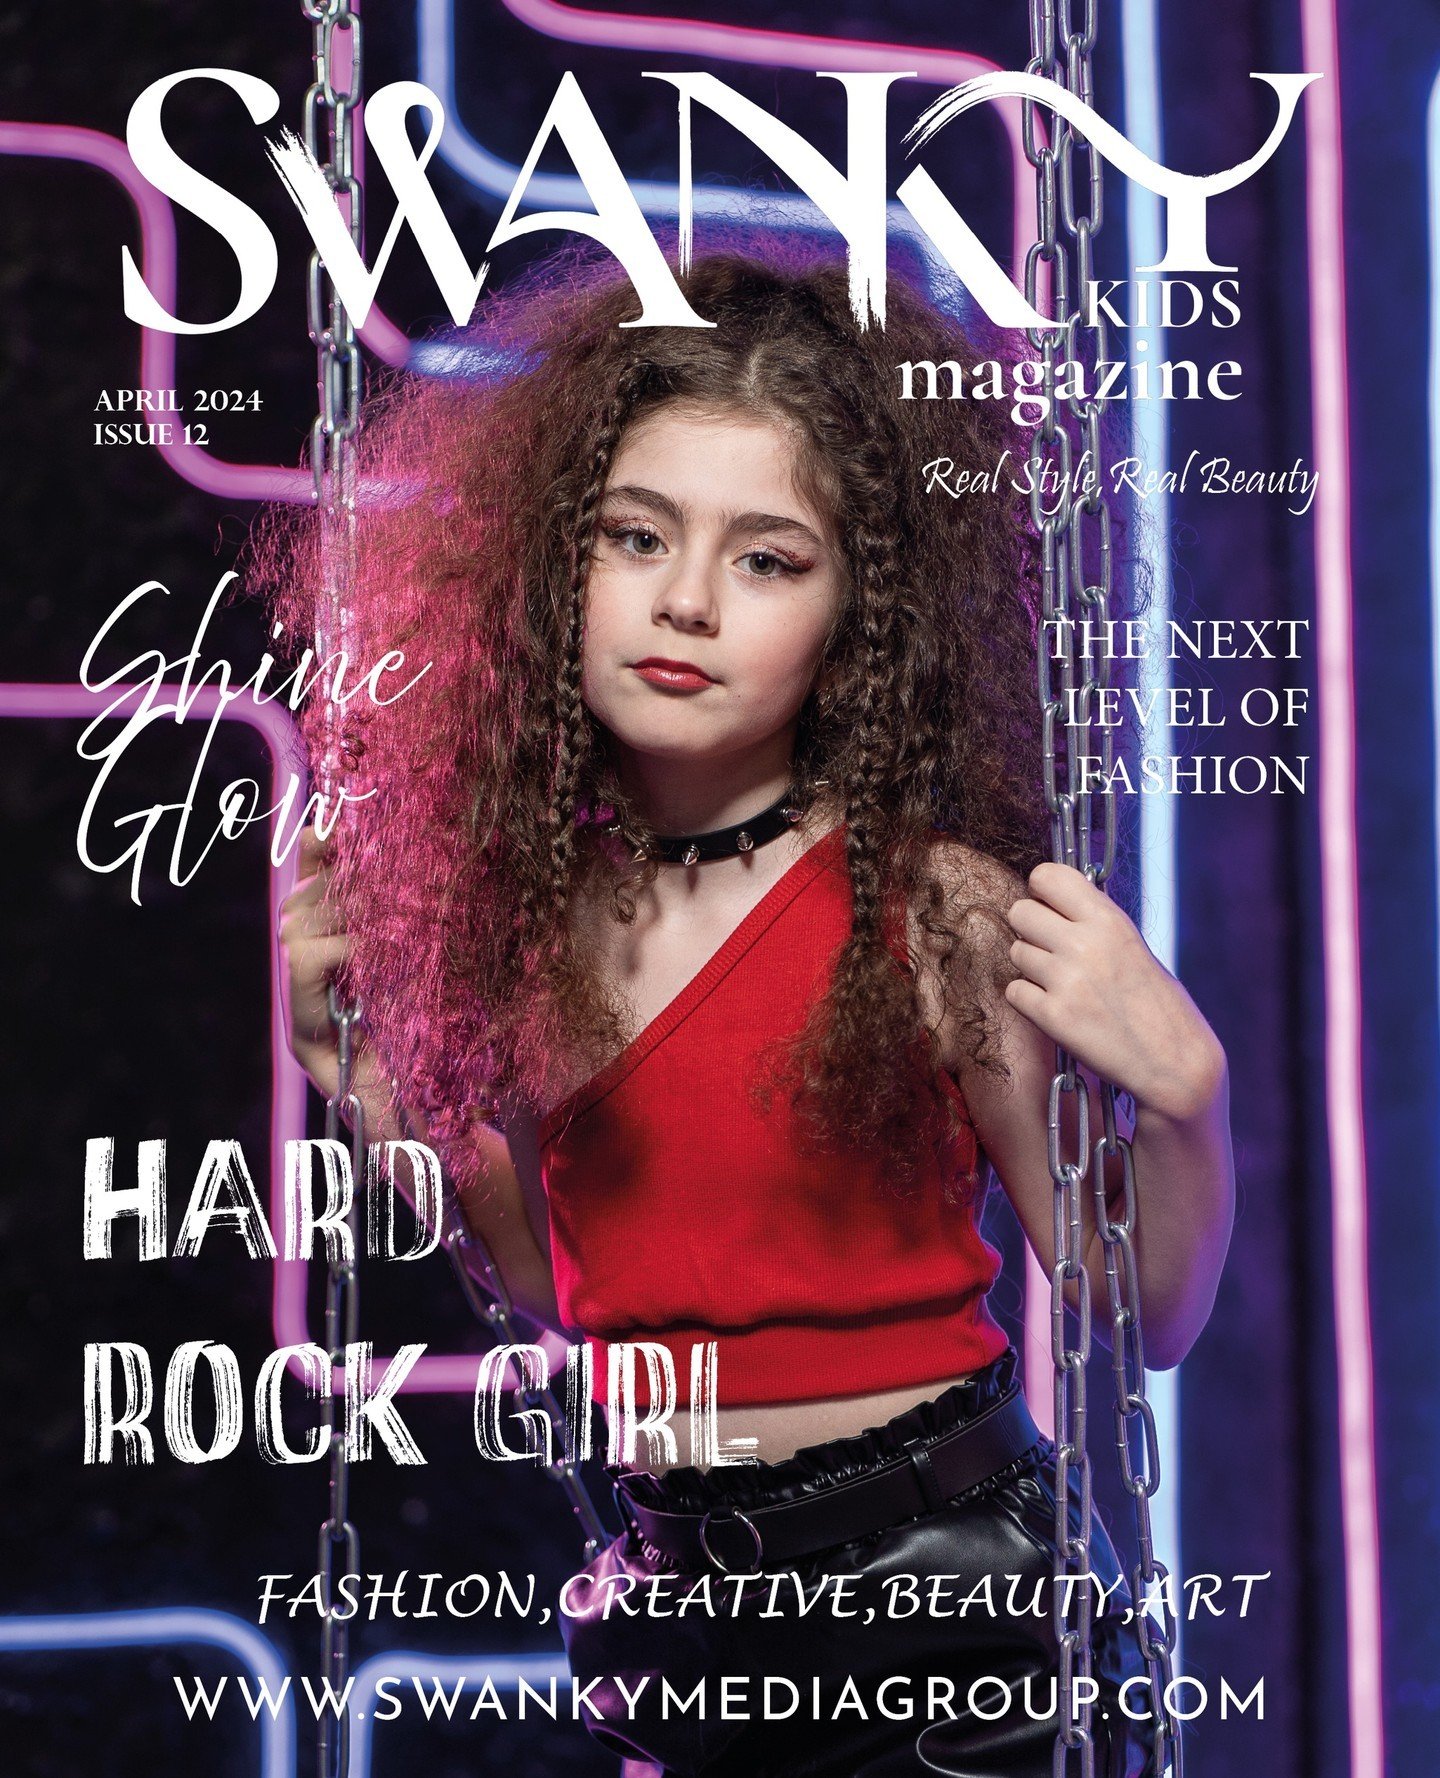 OUR APRIL ISSUES HAVE ARRIVED! 🎸⁠
⁠
Swanky Kids Magazine - April 2024: The Kids Fashion Edition Issue 12⁠
⁠
⁠Use &amp; Follow #swankykidsmag to spotlight!⁠
⁠
FRONT COVER: ⁠
⁠
'Hard Rock Girl'⁠
⁠
Female Model: Vika_ayvazyan2014⁠
IG: @vika_ayvazyan201